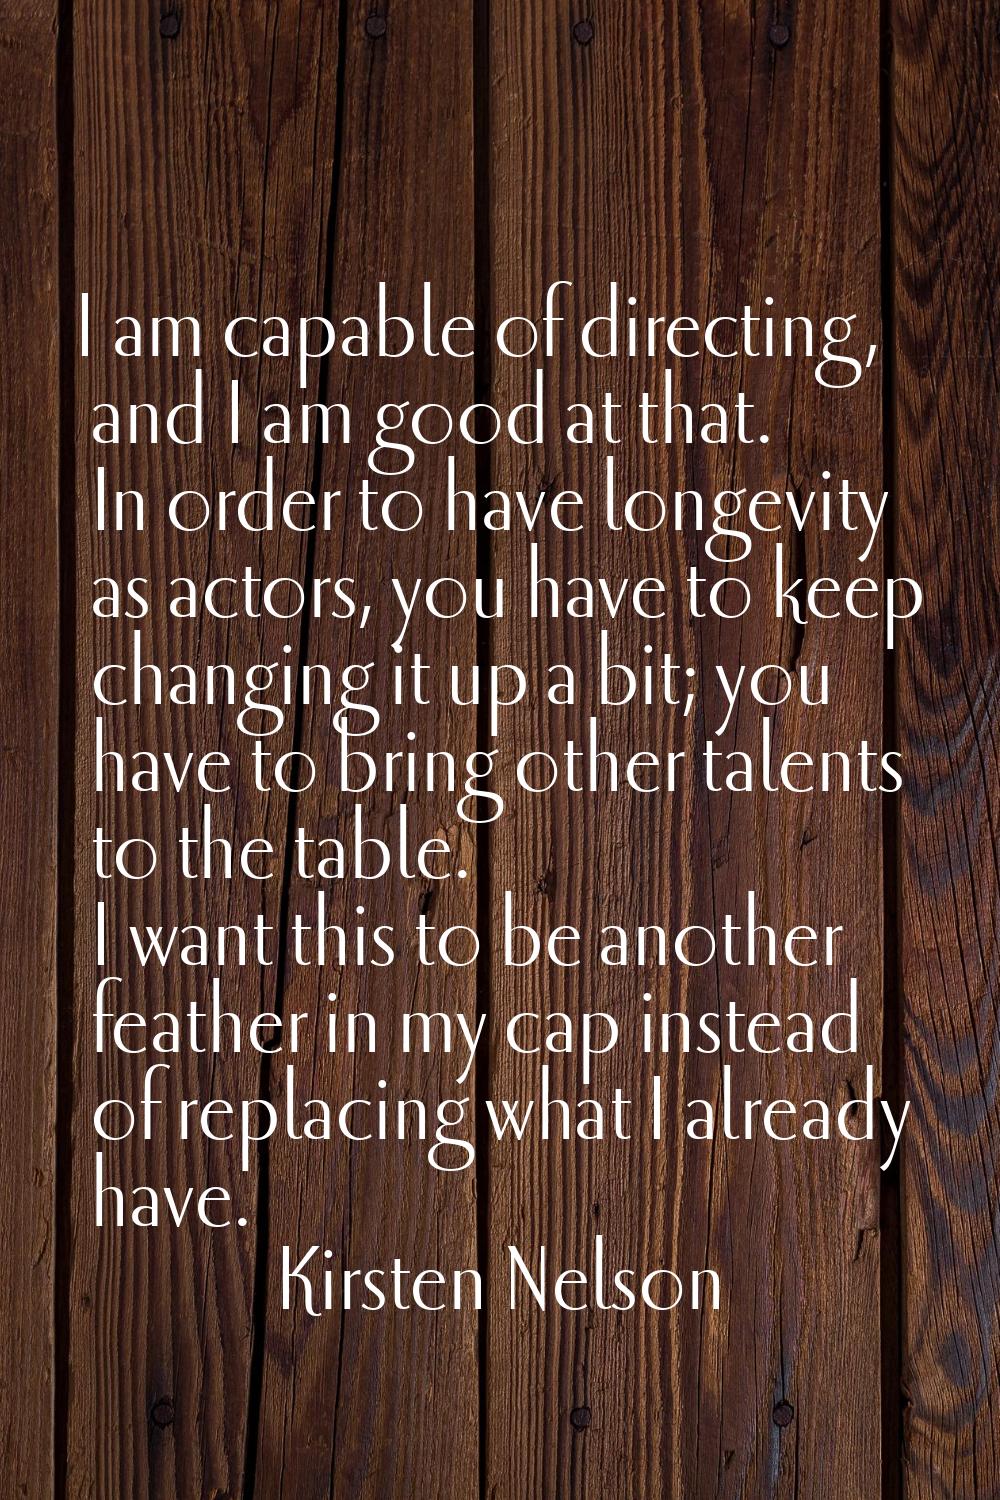 I am capable of directing, and I am good at that. In order to have longevity as actors, you have to